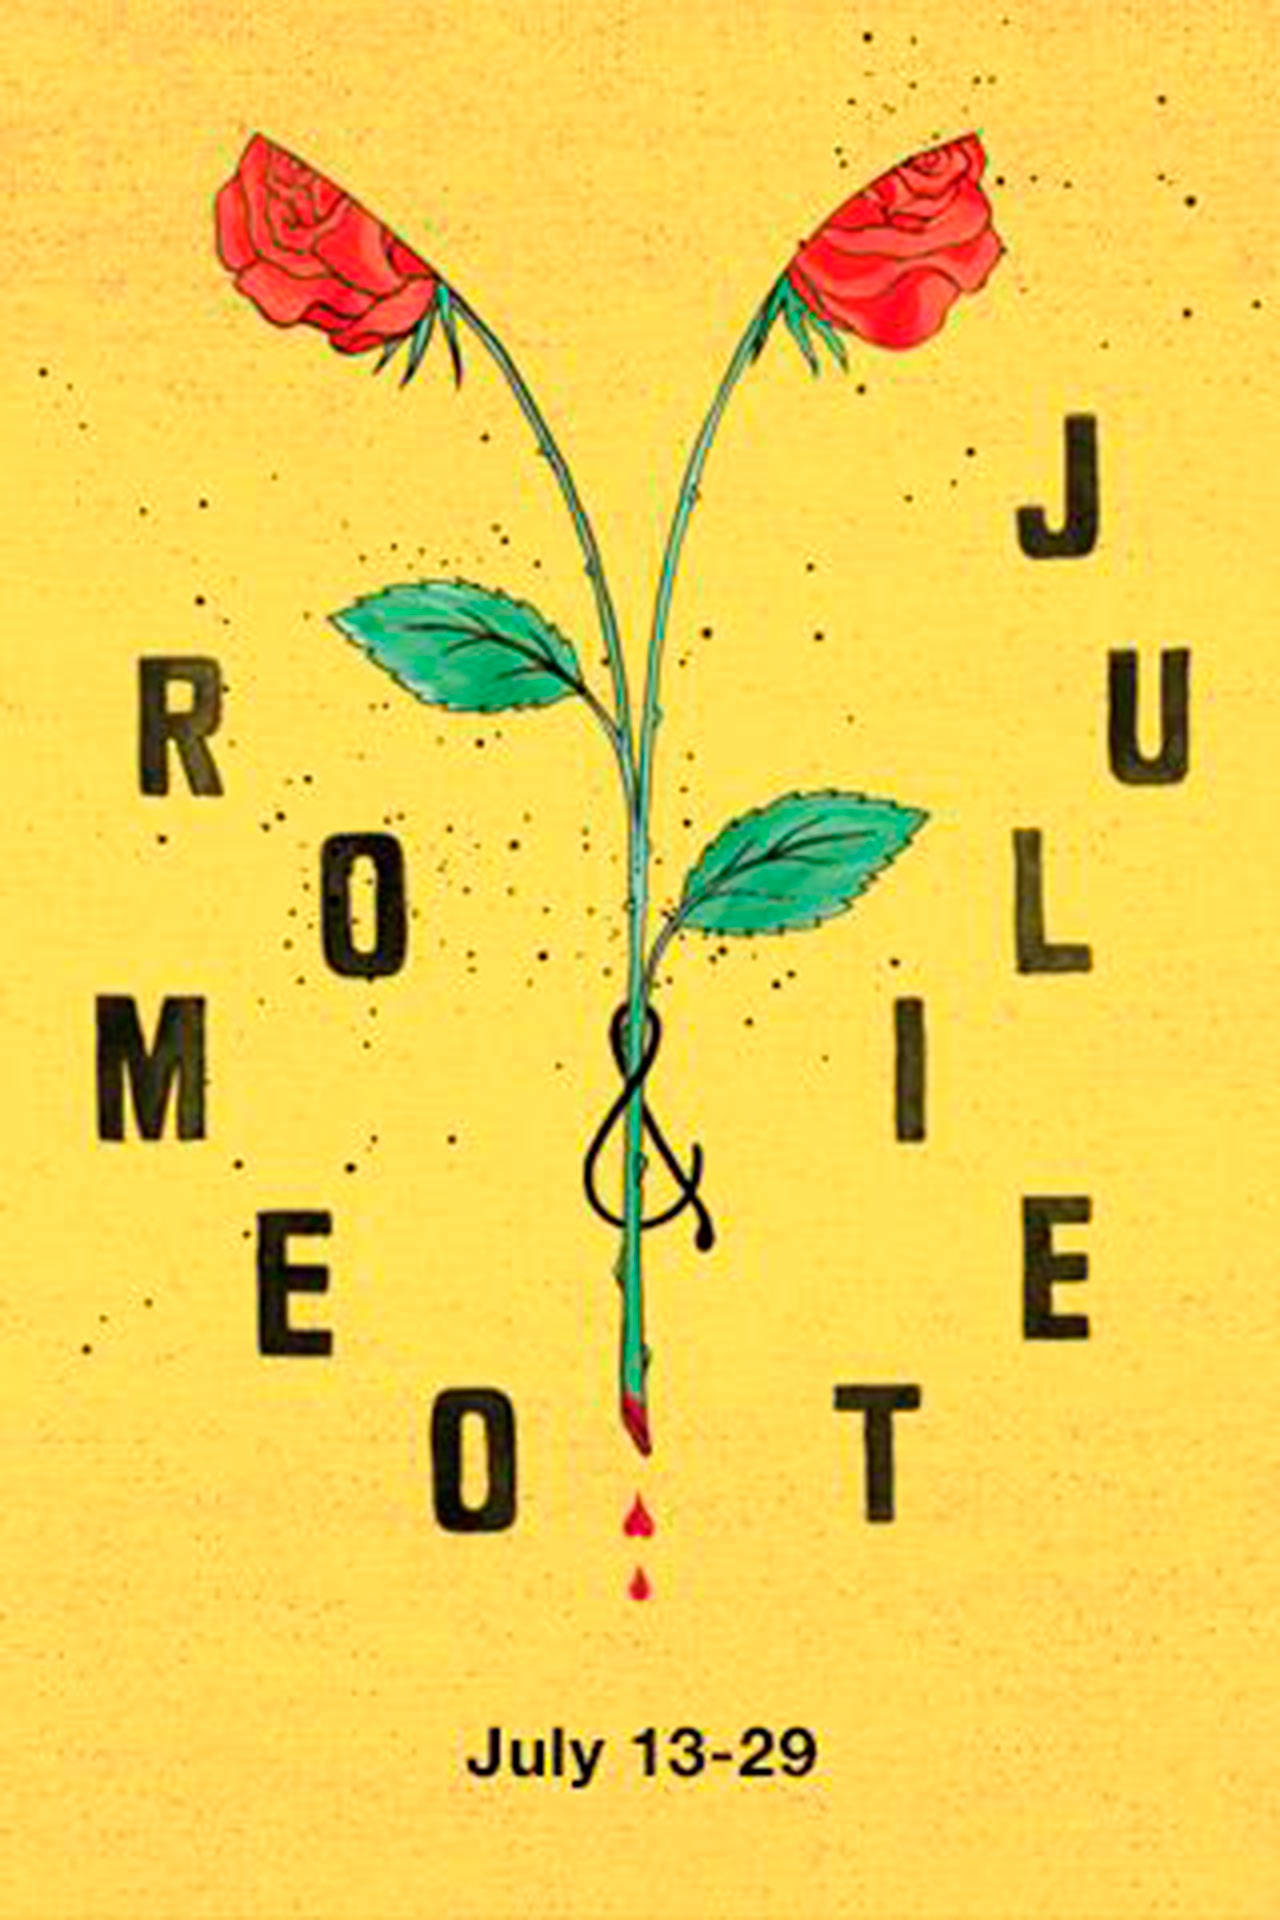 Cast announced for BPA’s ‘Romeo & Juliet’